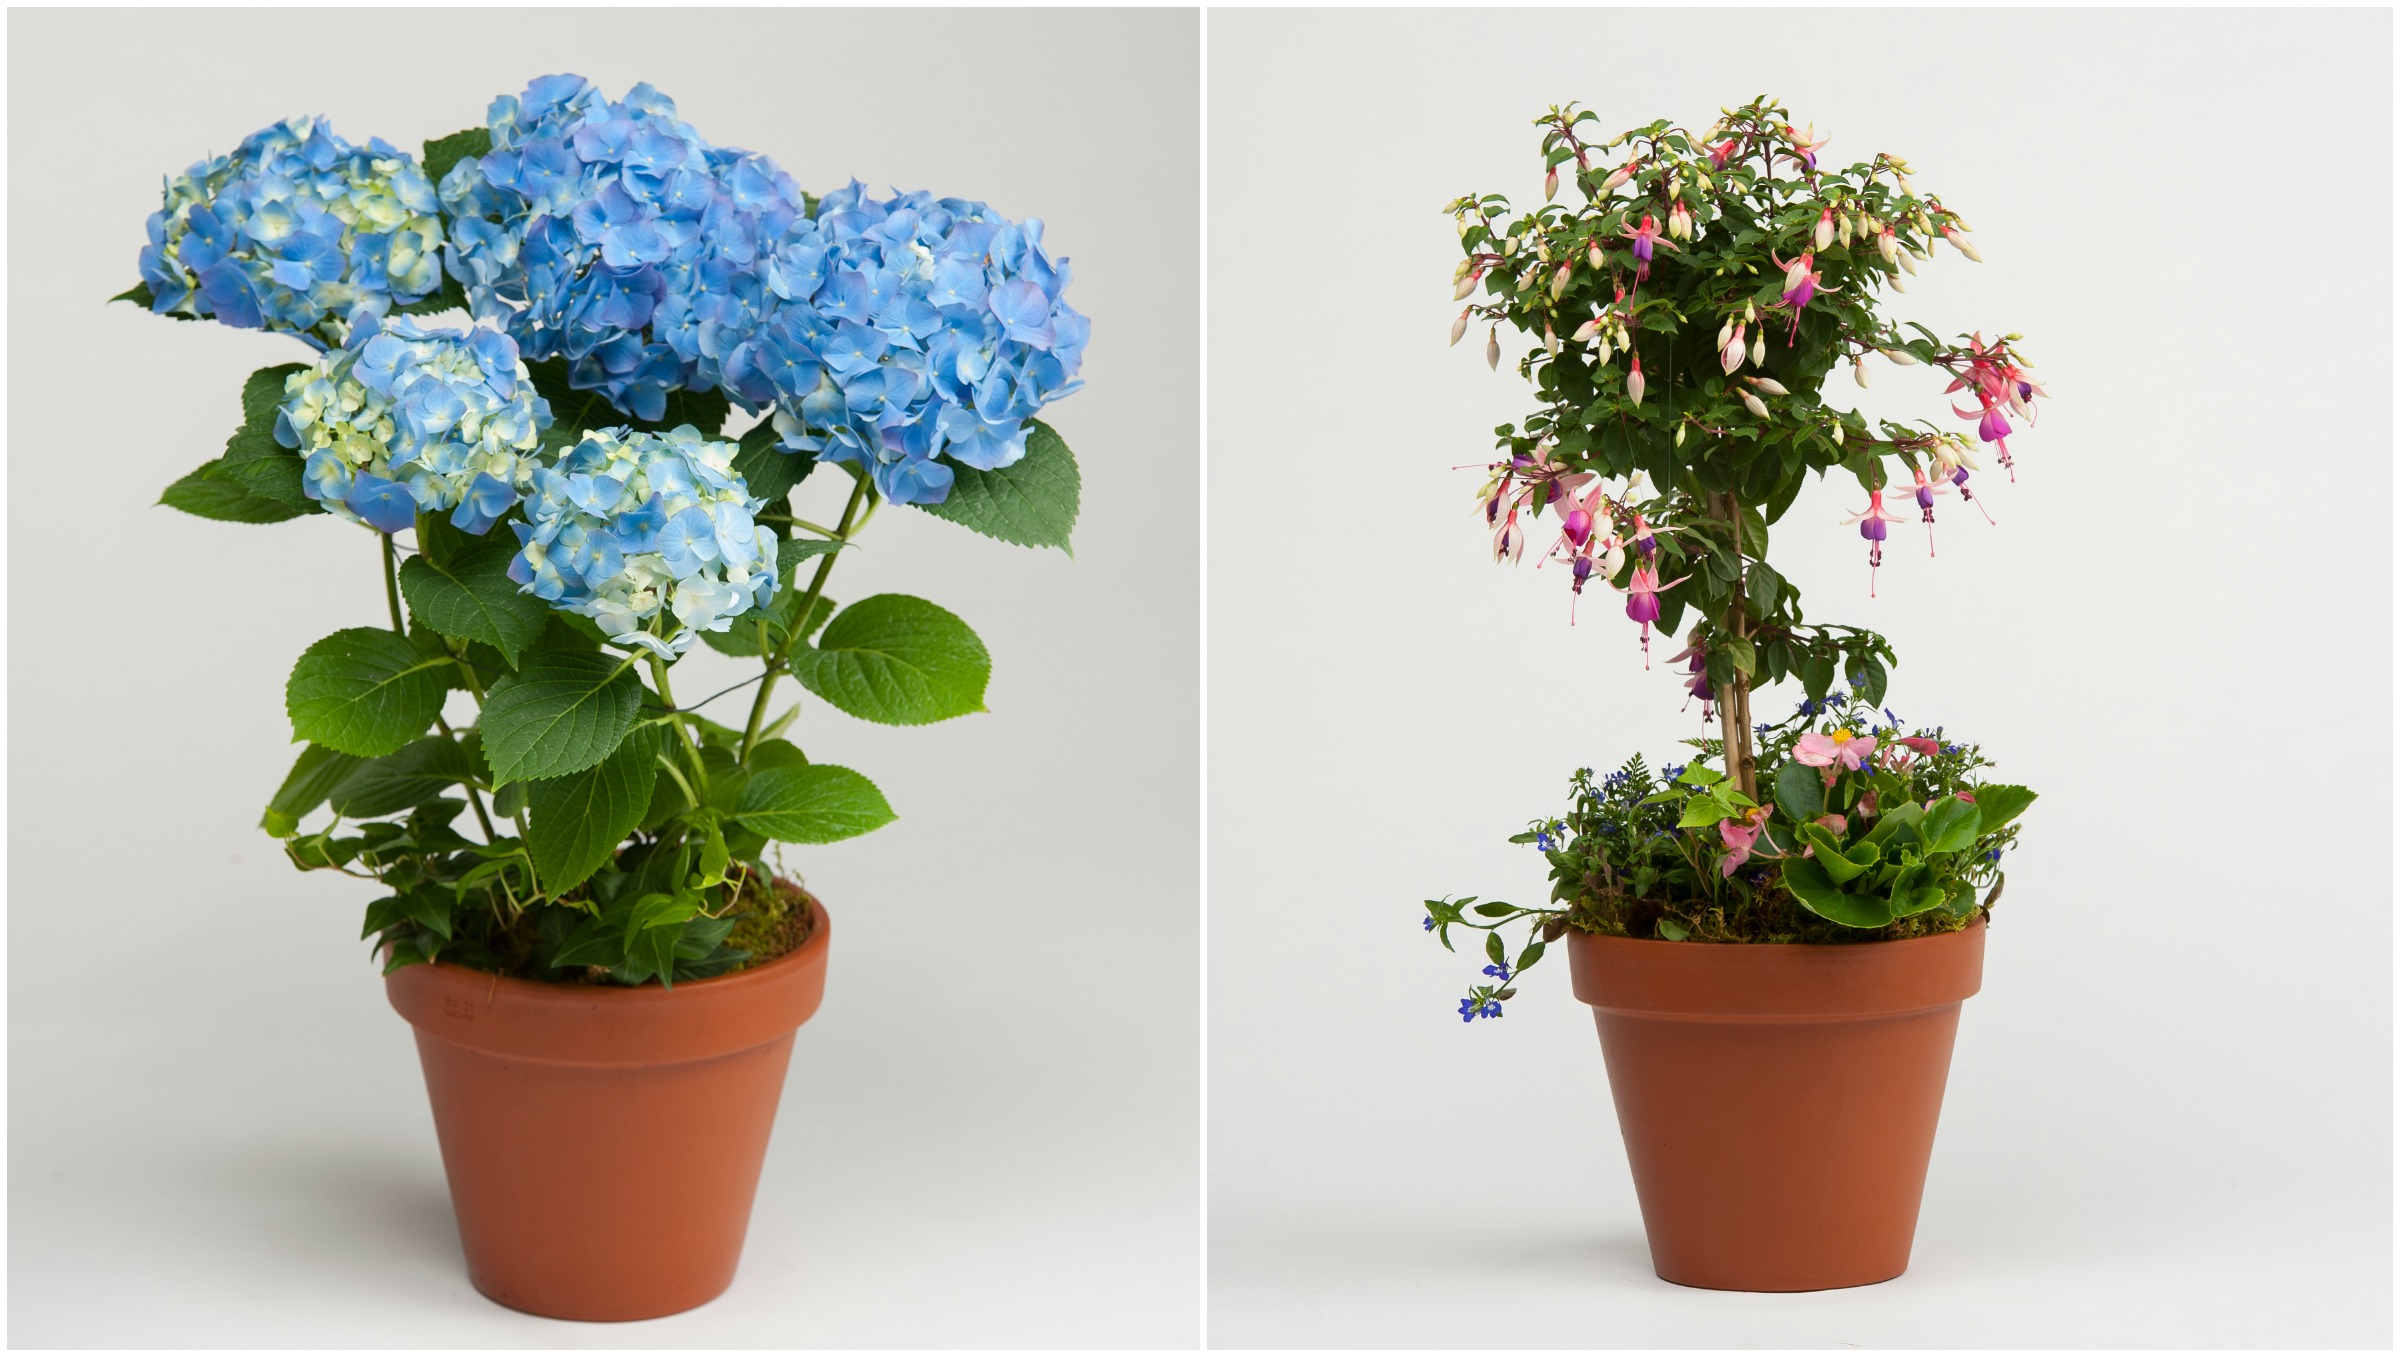 (Left) Blue Hydrangea Plant in a Terracotta Clay Pot - $55; (Right) Fuchsia Topiary Plant with under-planting of Annuals in a Terracotta Clay Pot - $85